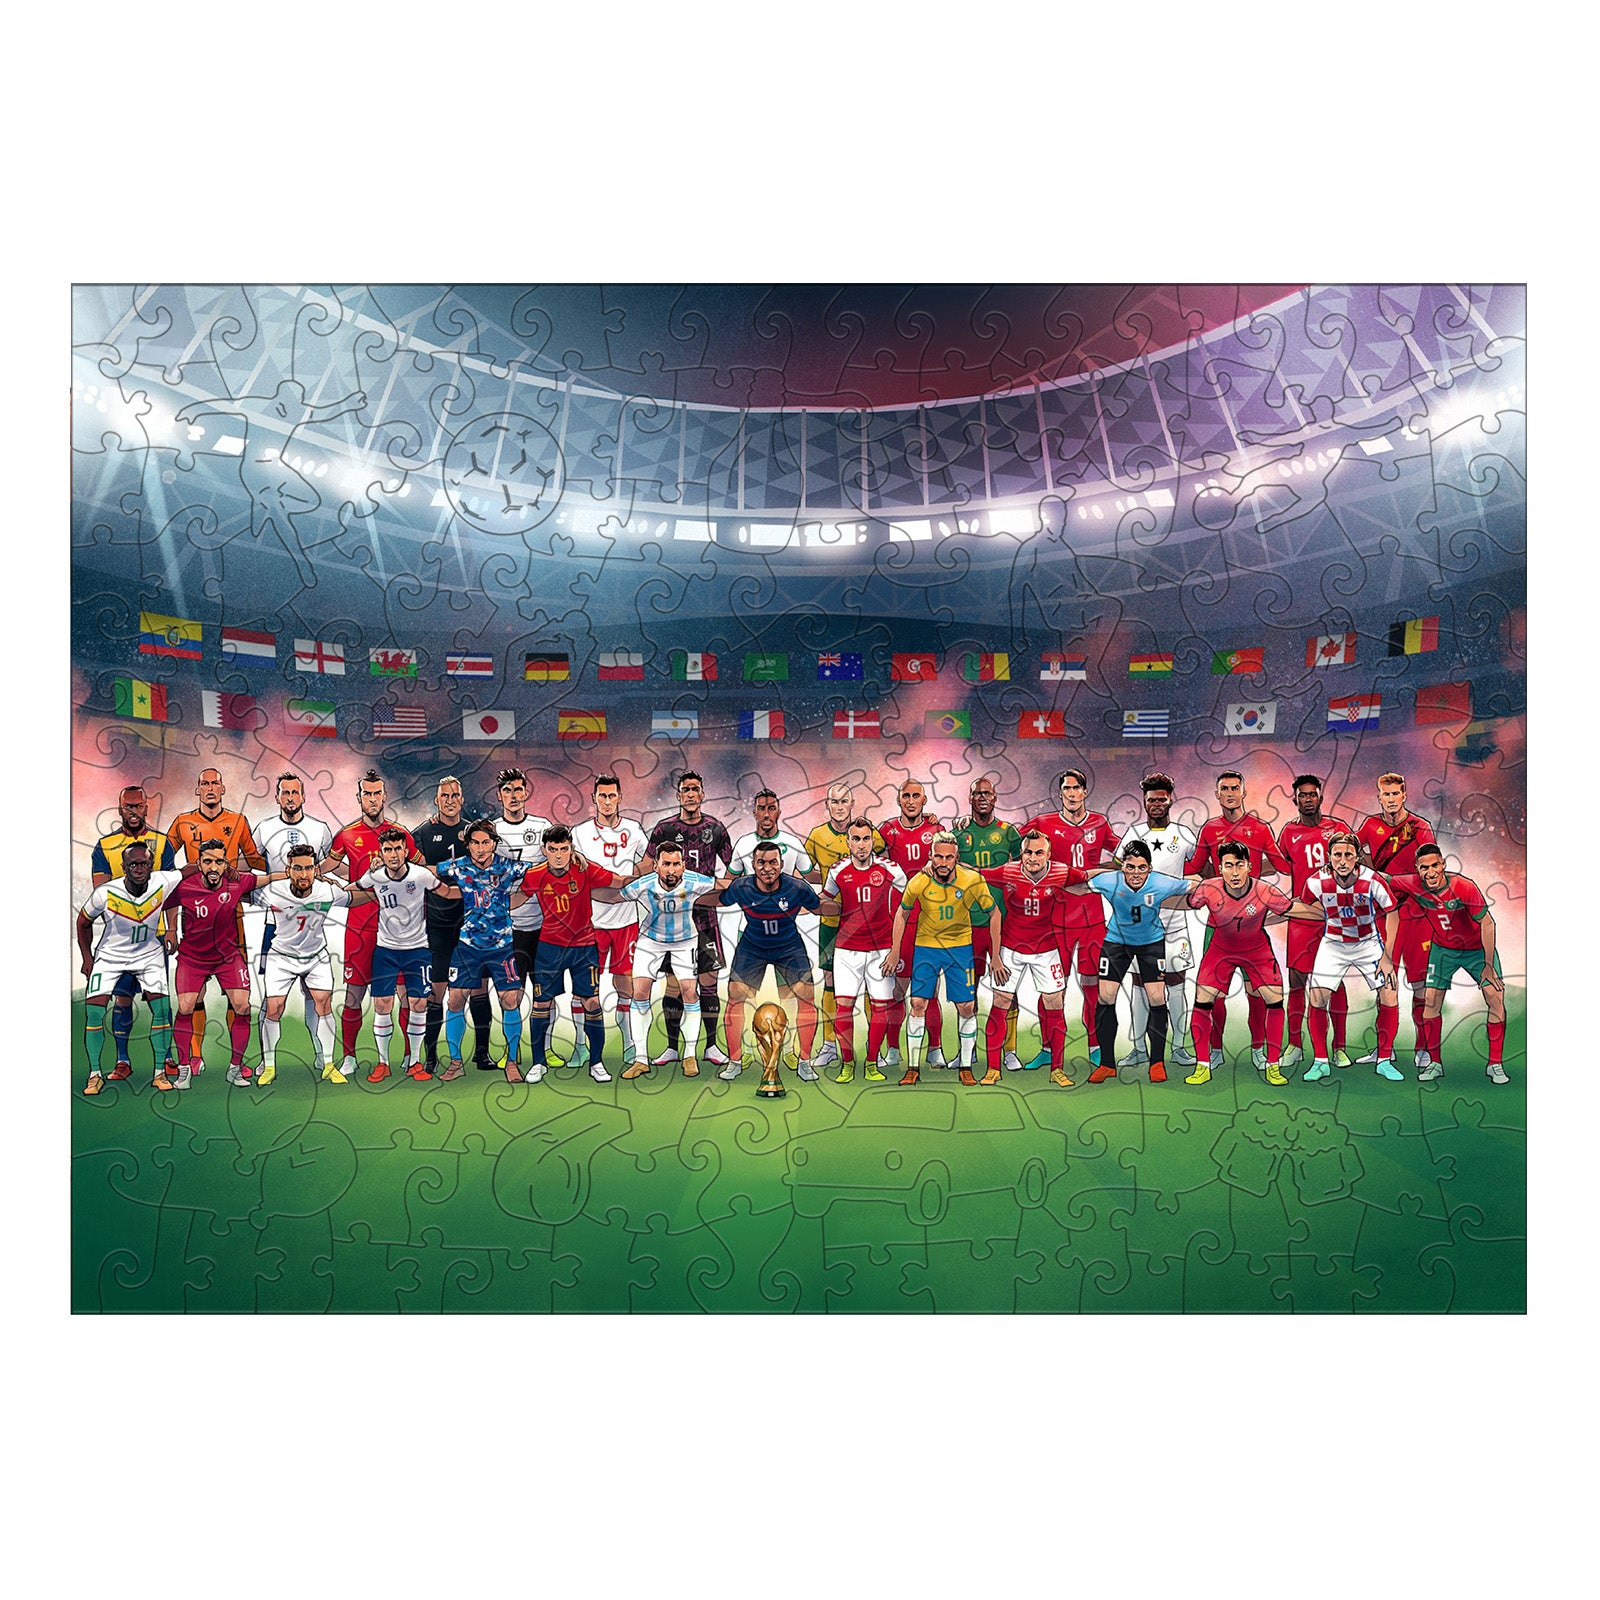 The World Cup Challenge(Accept Personalized Photo Puzzle)